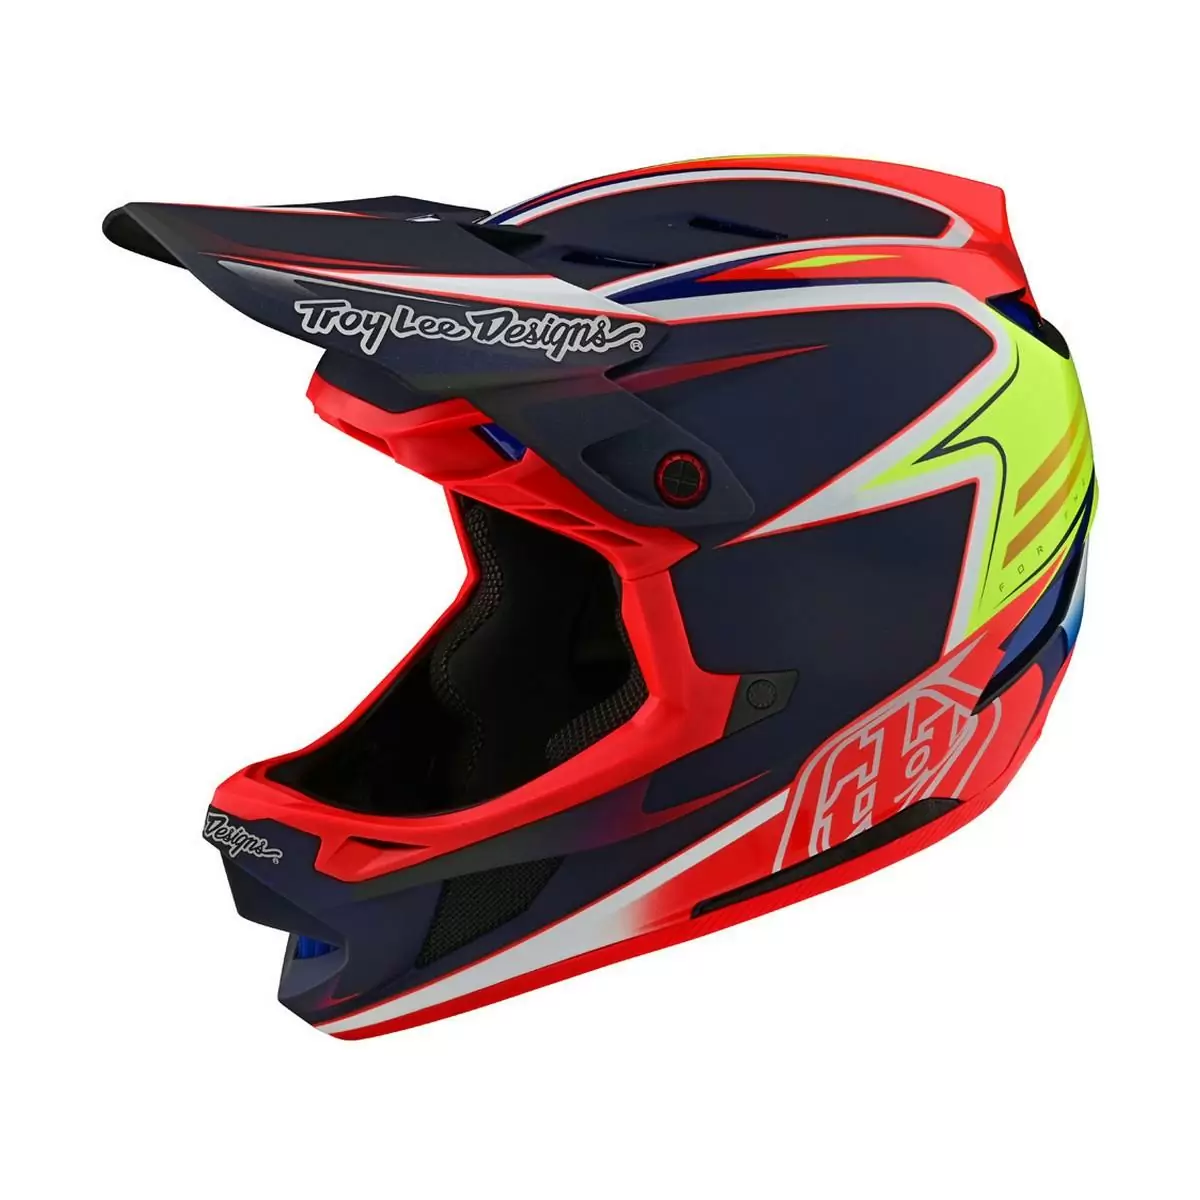 Full Face MTB Helmet D4 MIPS TeXtreme Carbon Stealth Black/Red Size M (57-58cm) #1